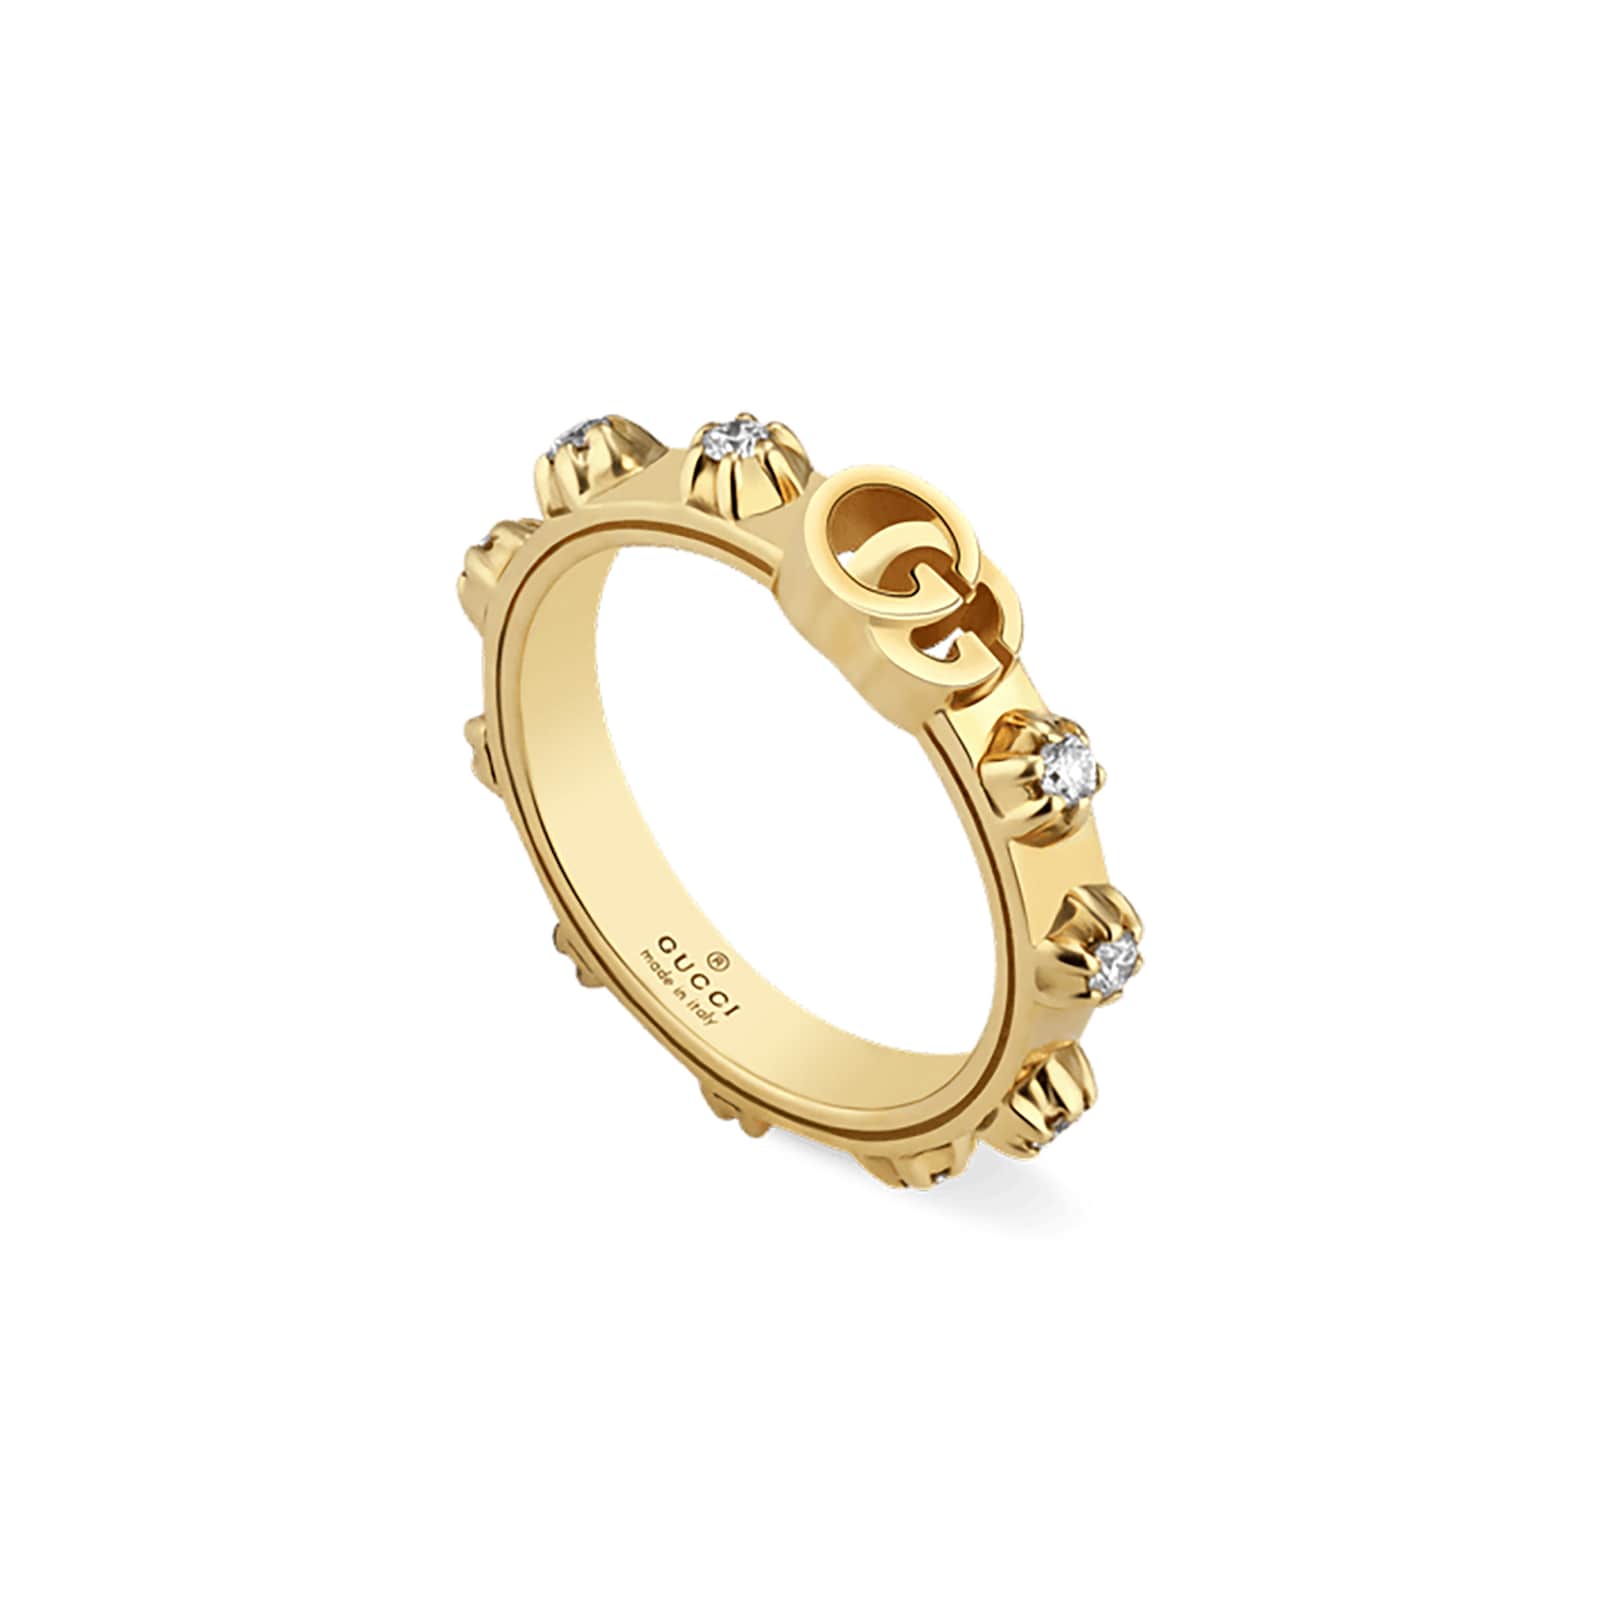 gucci 18ct gold ring